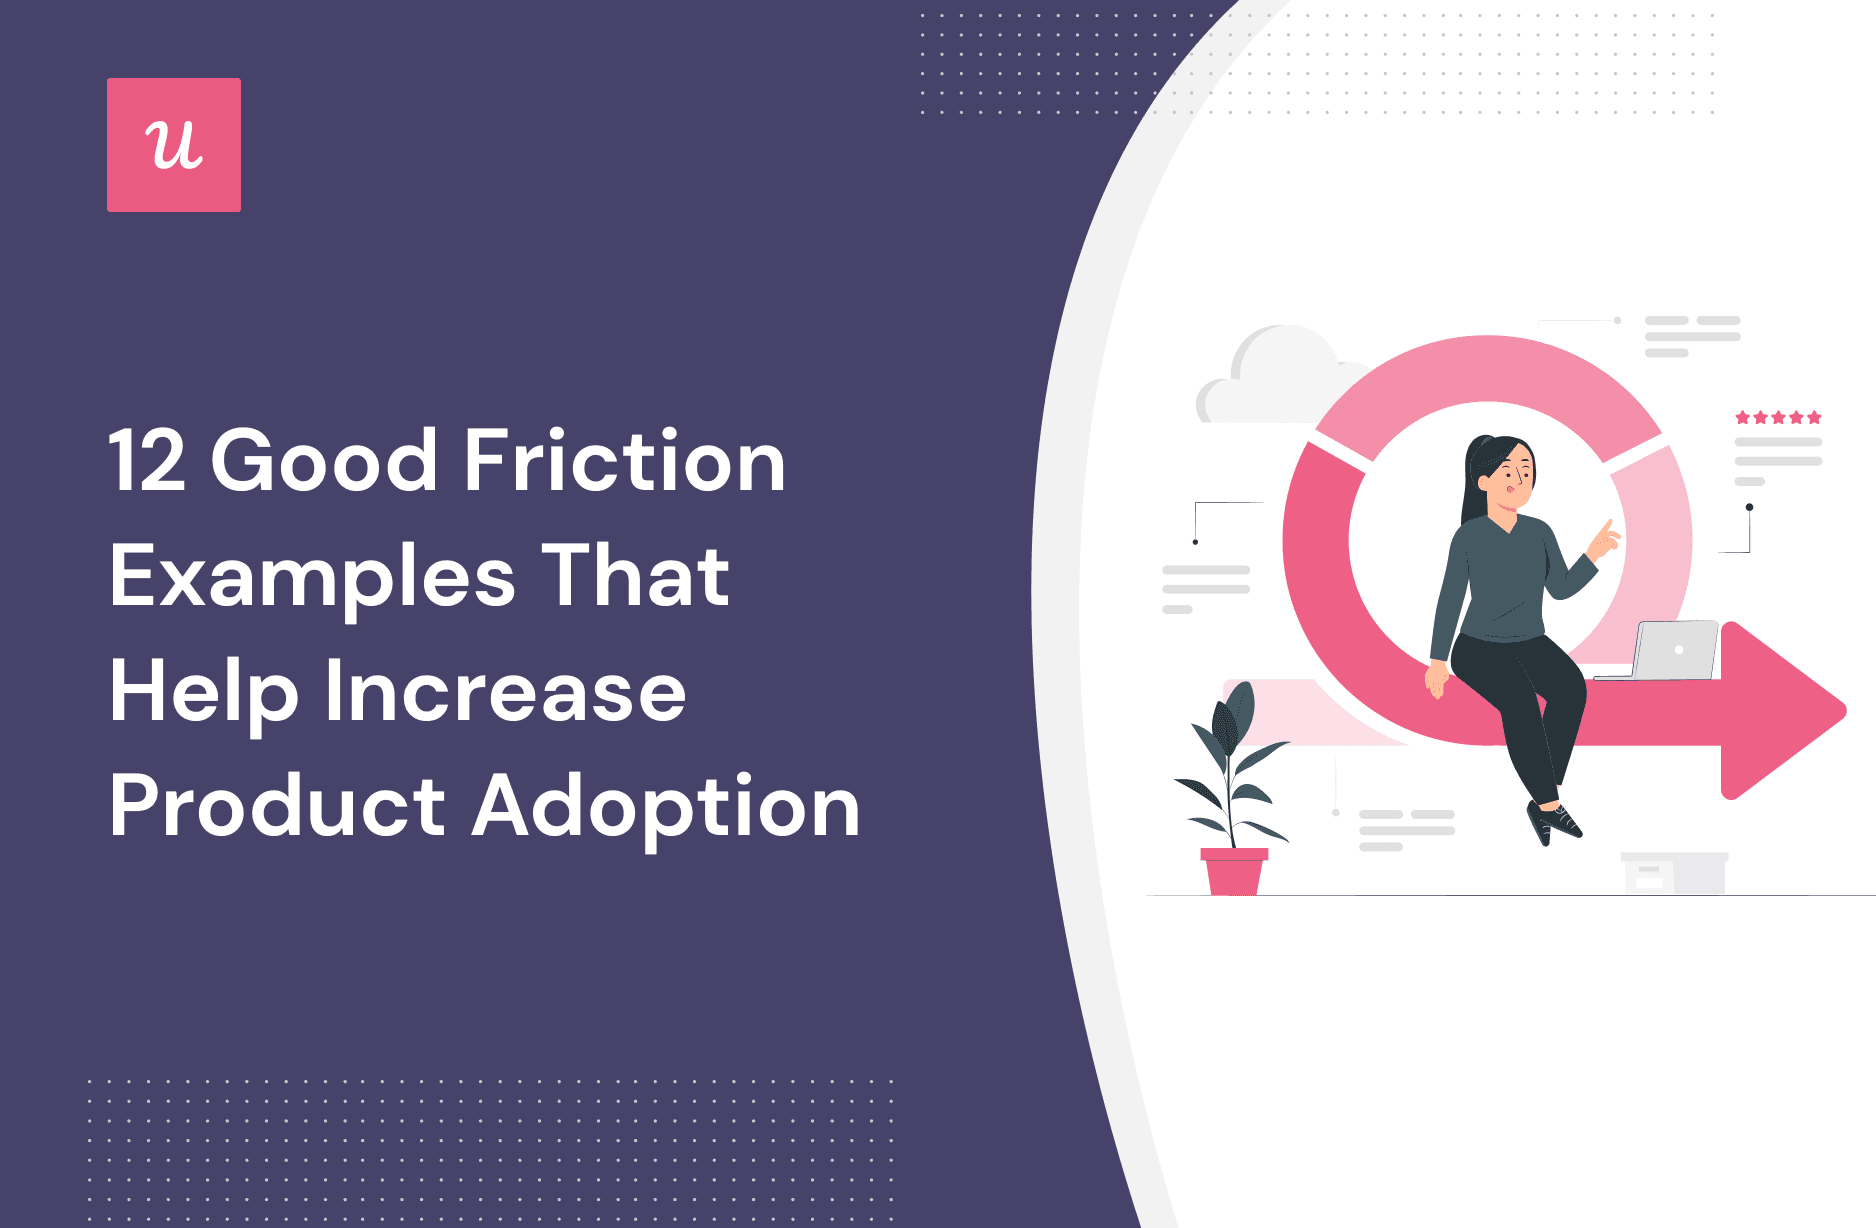 12 Good Friction Examples That Help Increase Product Adoption cover